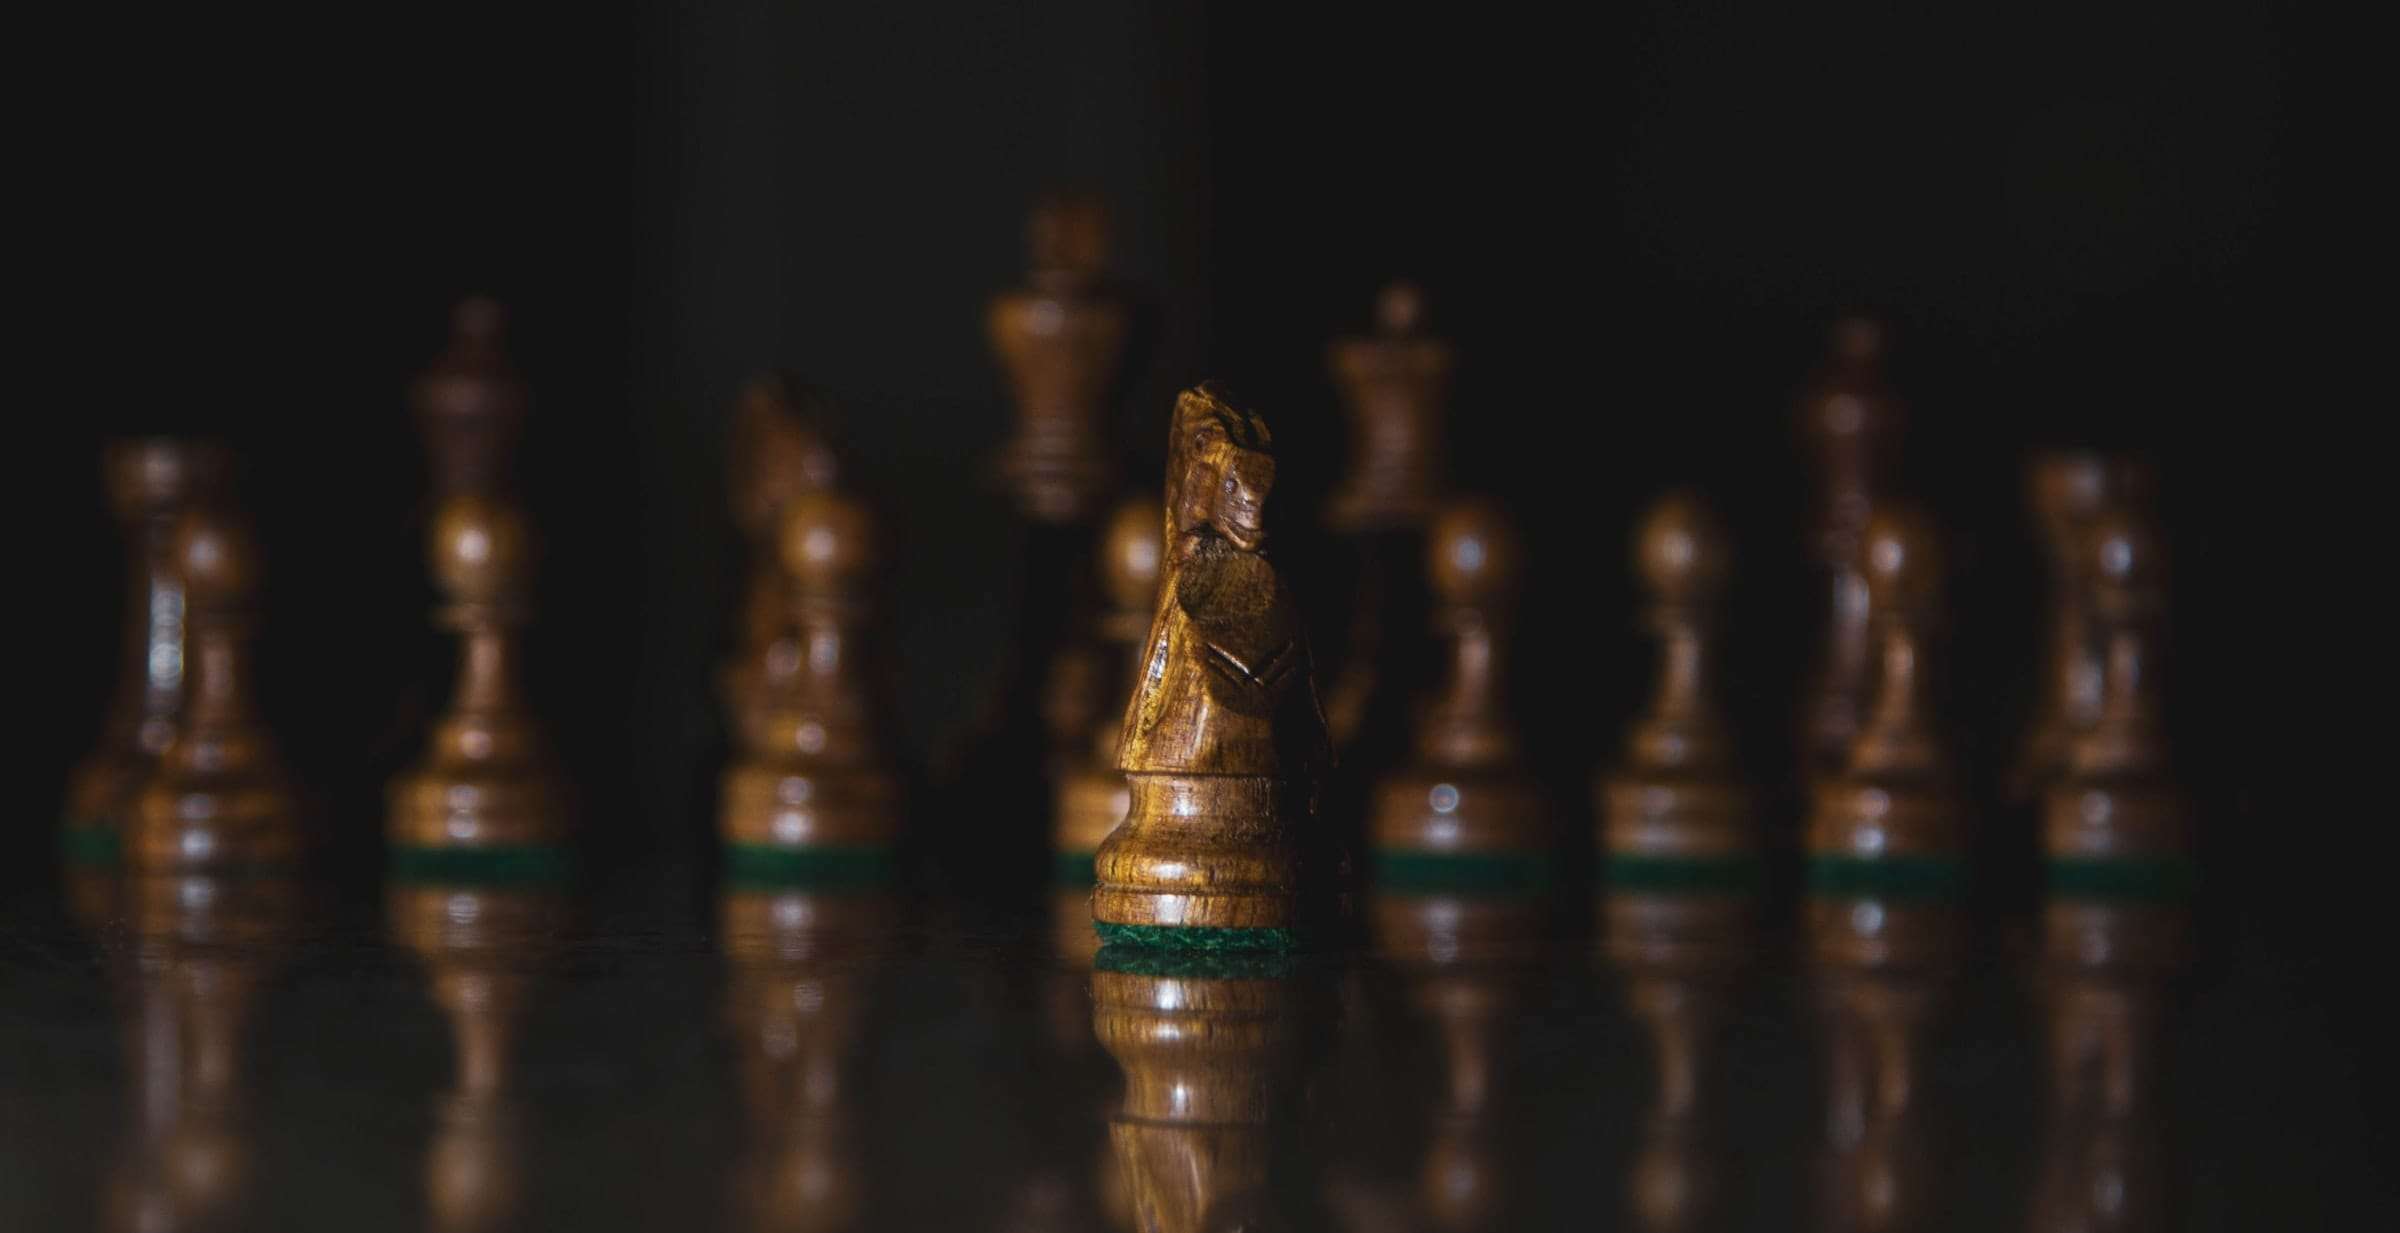 Strategic chess playing related to law